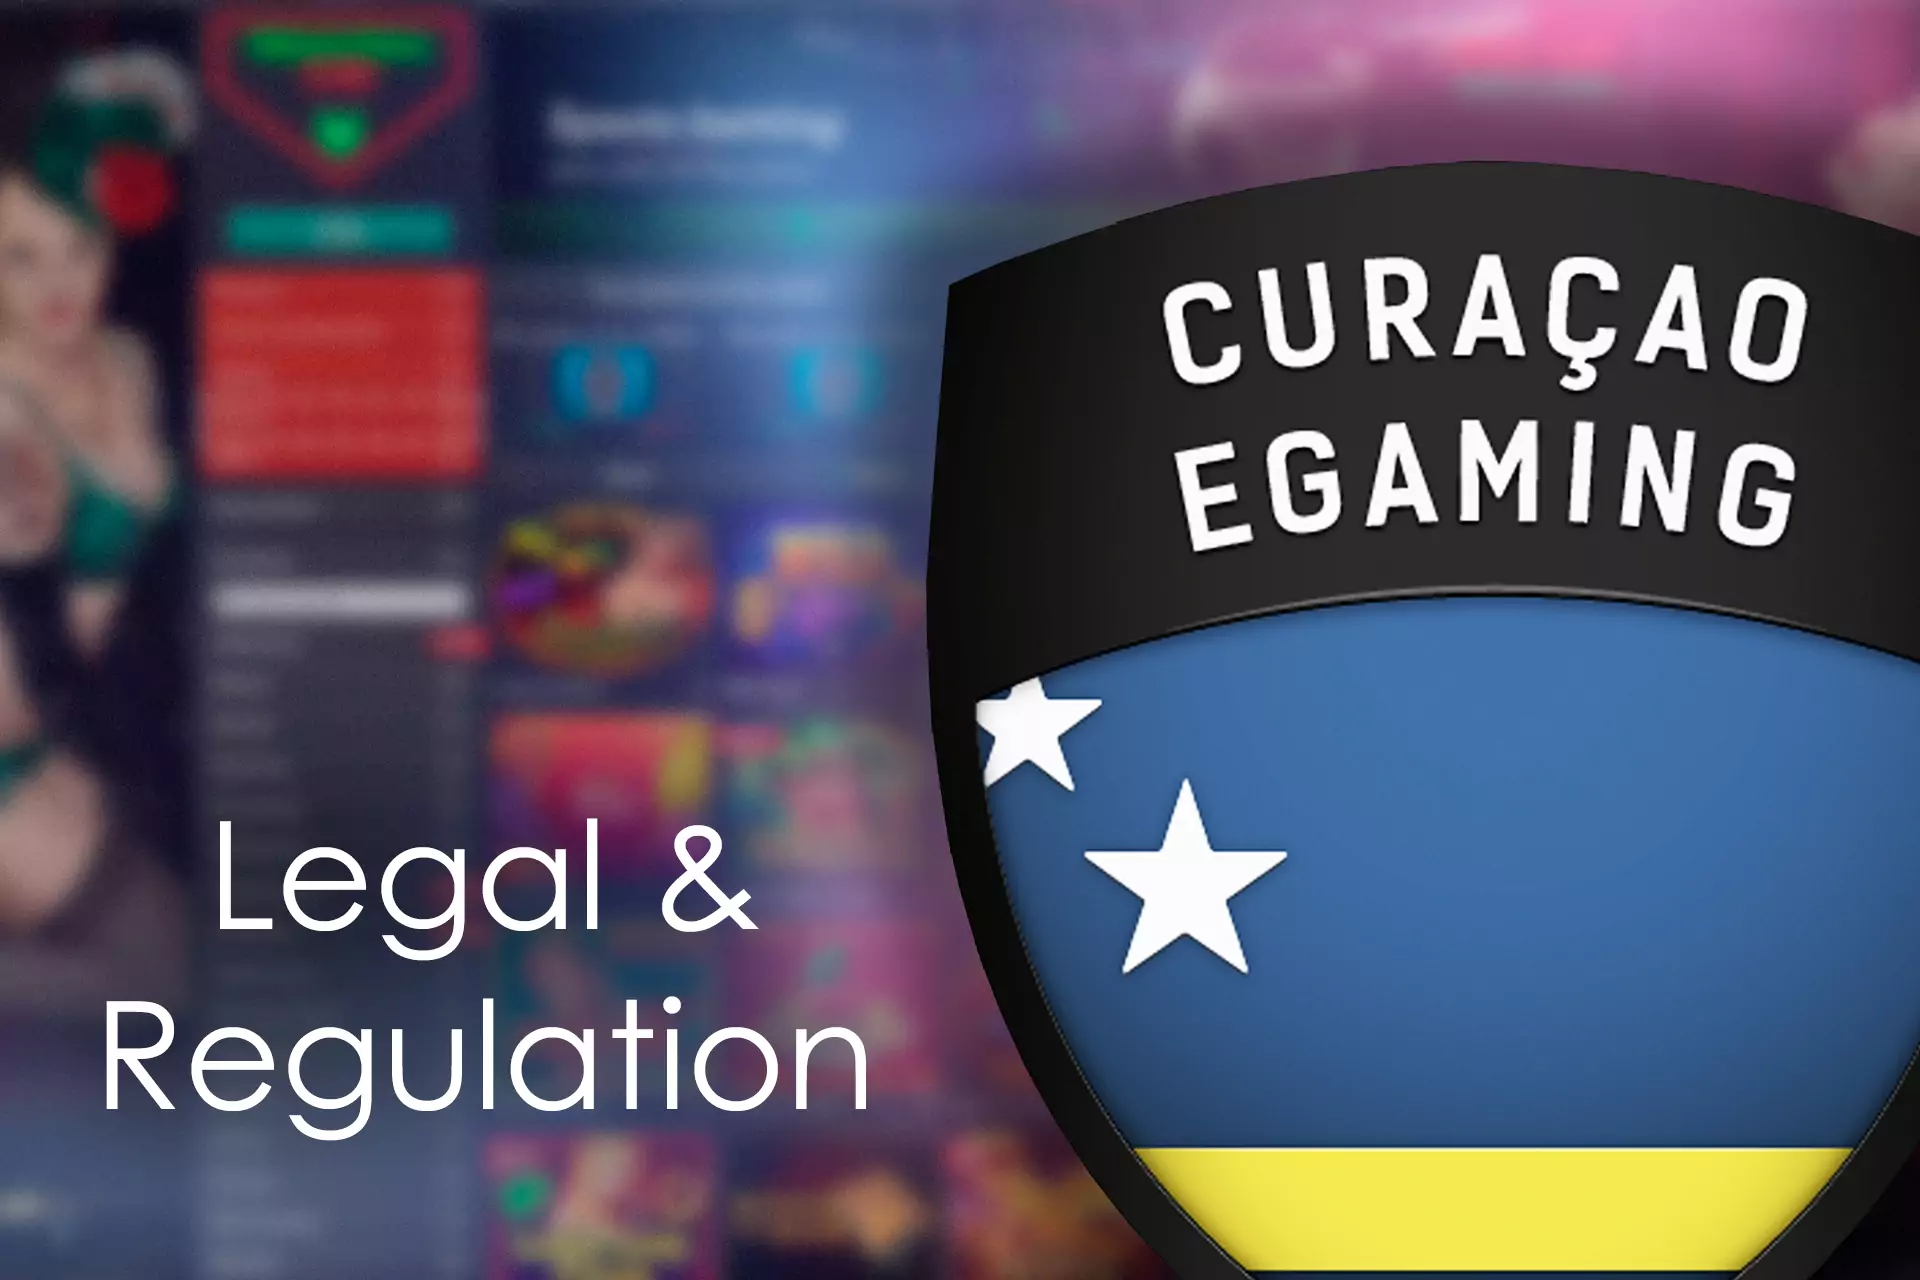 The Pin-up Casino site is totally legal since it works under the Curacao license.